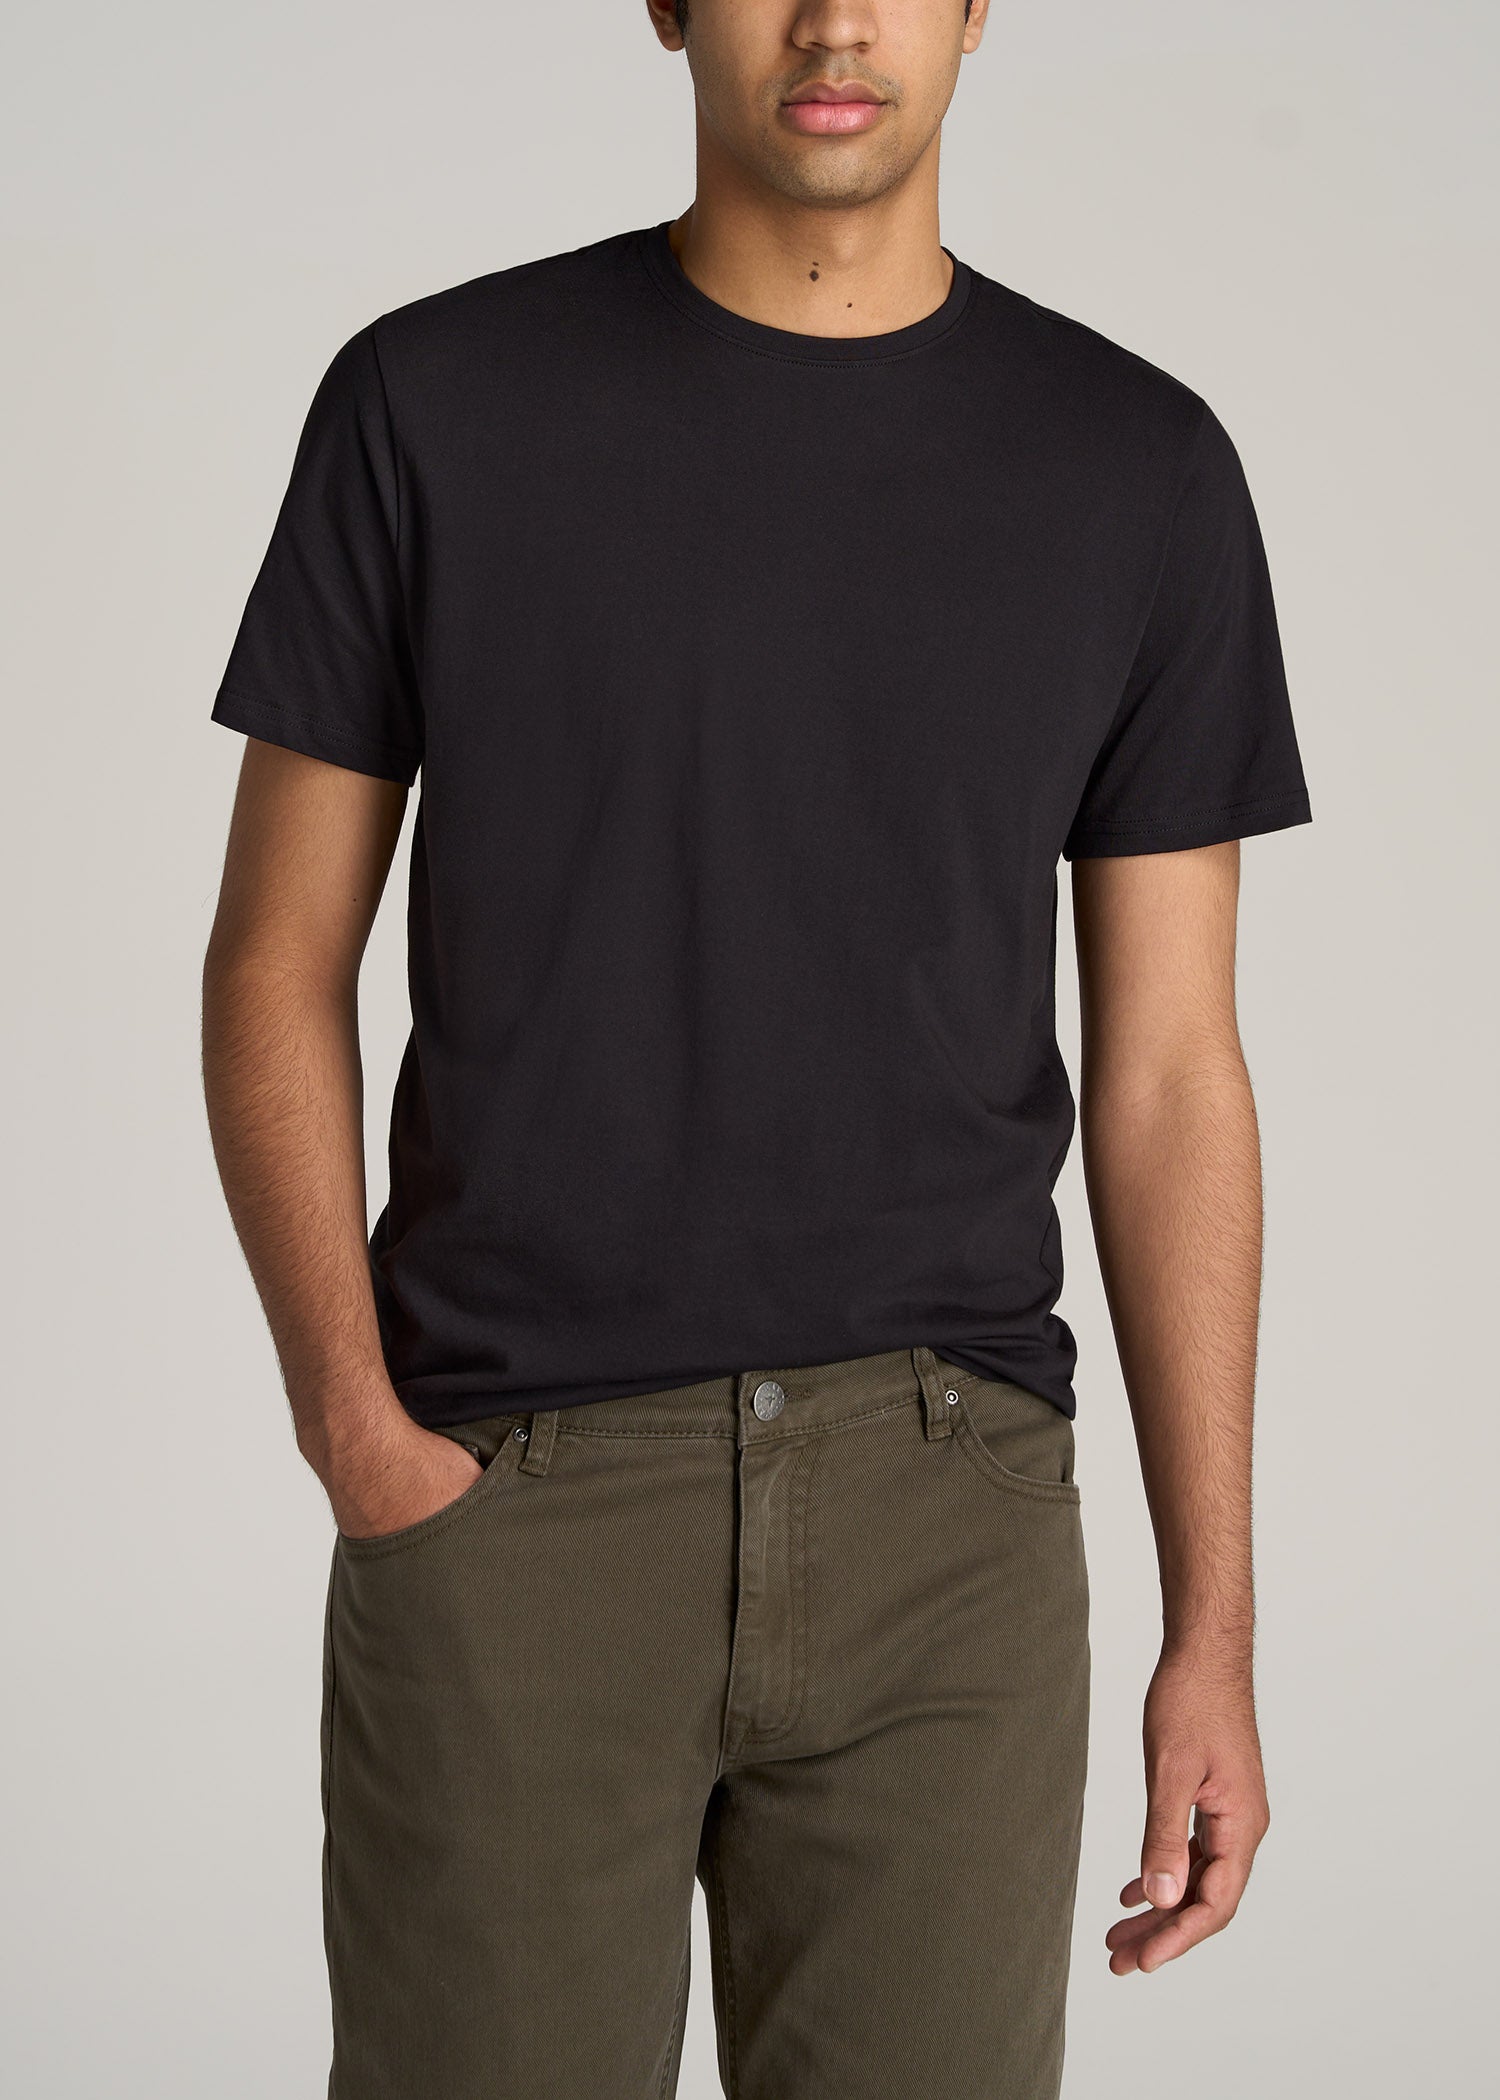 The Essential SLIM-FIT Crewneck Men's Tall Tees in Charcoal Mix